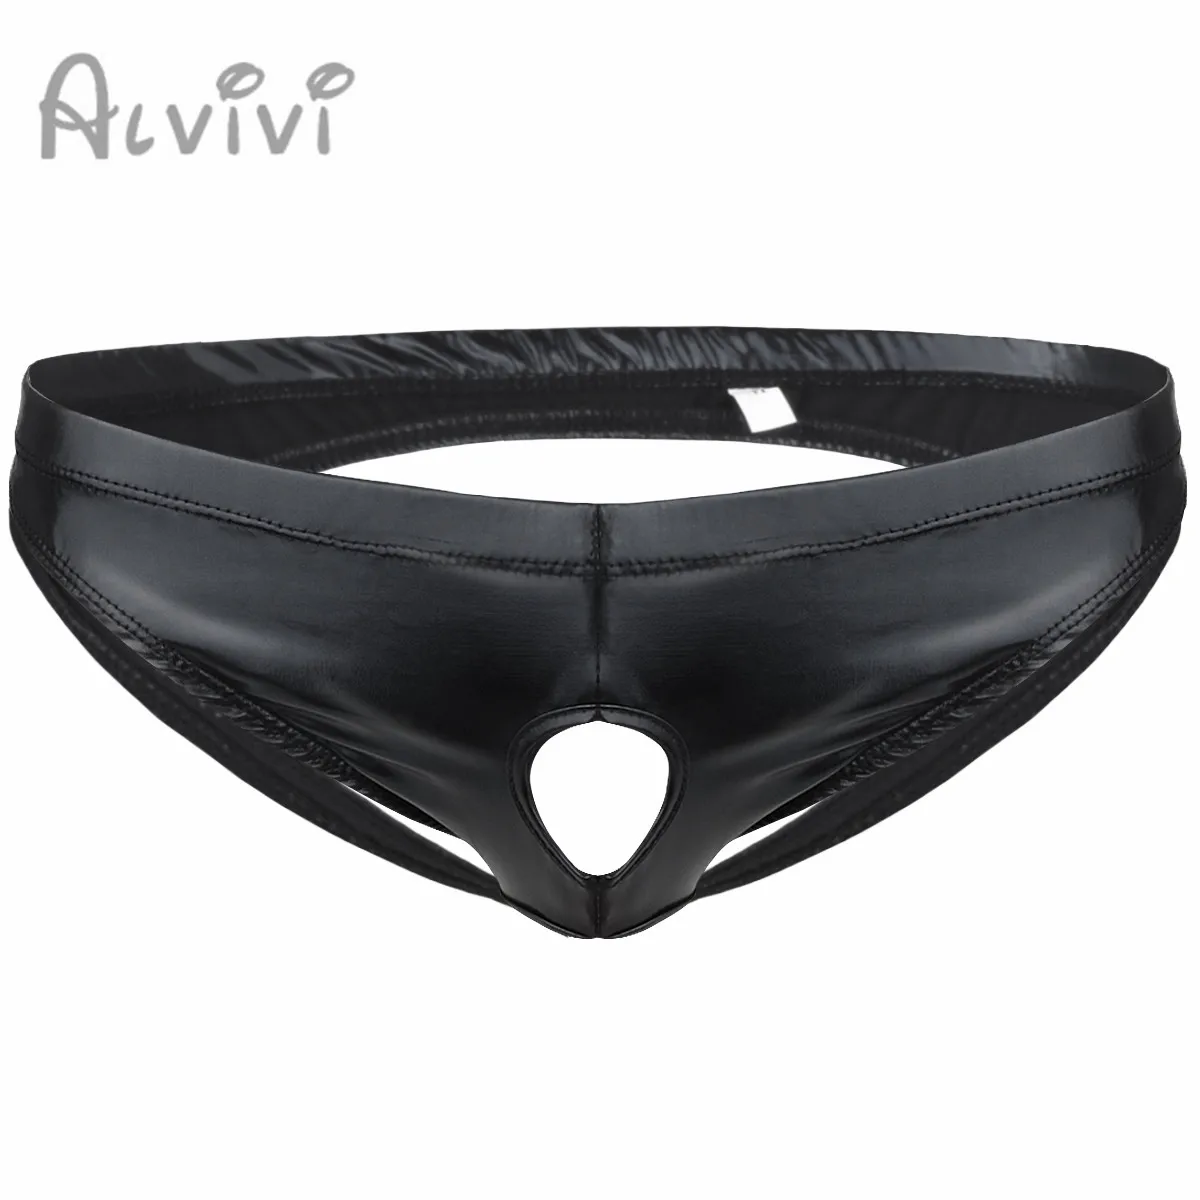 Sexy Lingerie Men Leather Underwear Briefs Men Open Front Penis Pouch Hole Gay Underwear Sissy Panties Crotchless Underpants